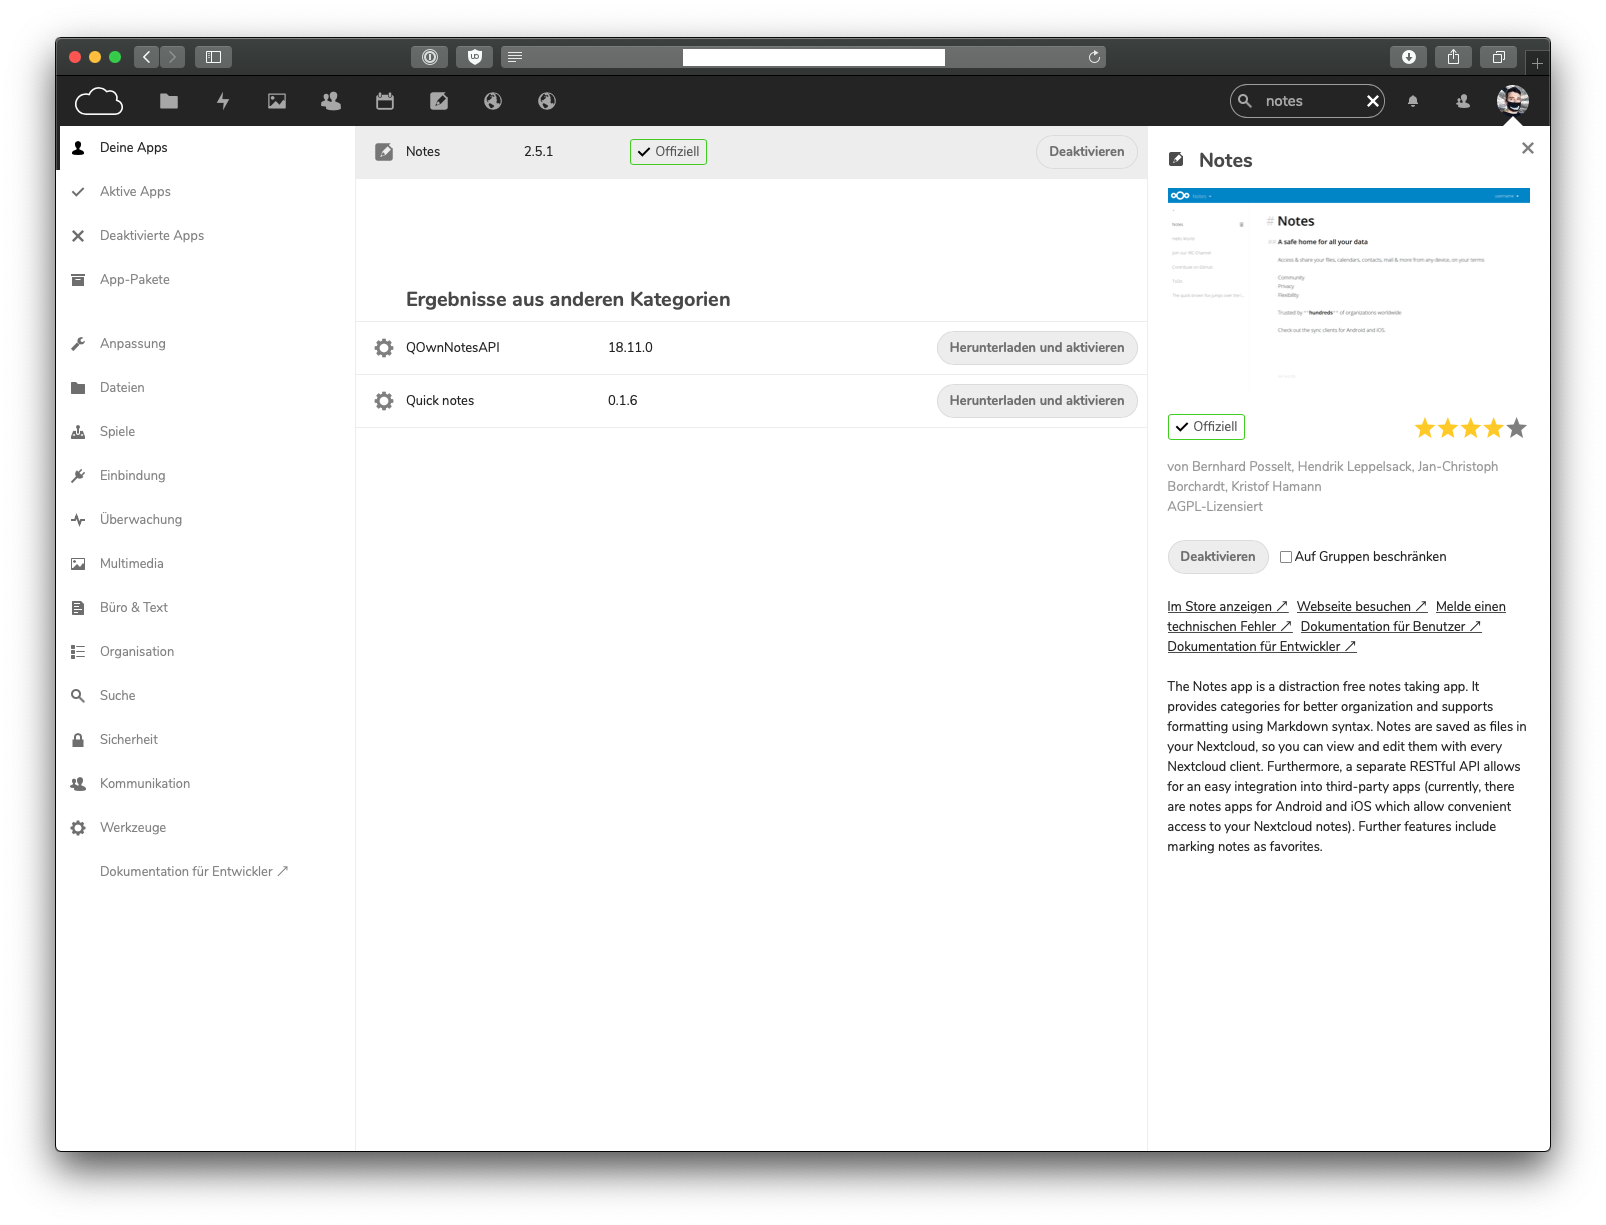 Installing the Notes app in Nextcloud